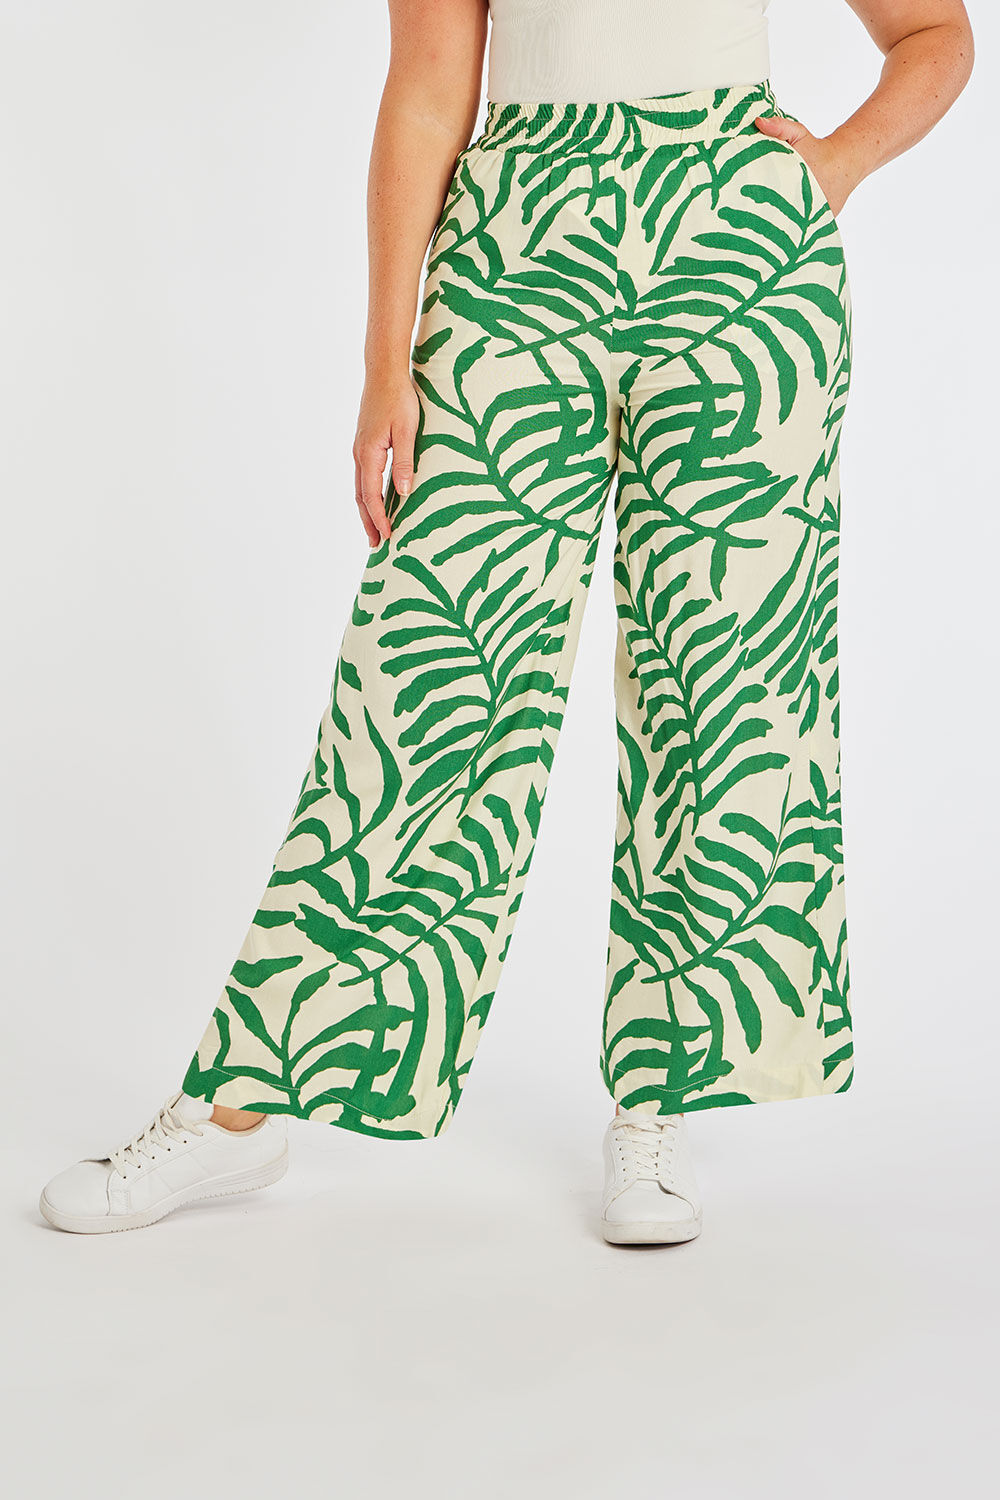 Bonmarche Green Leaf and Palm Print Wide Leg Elasticated Trousers, Size: 10